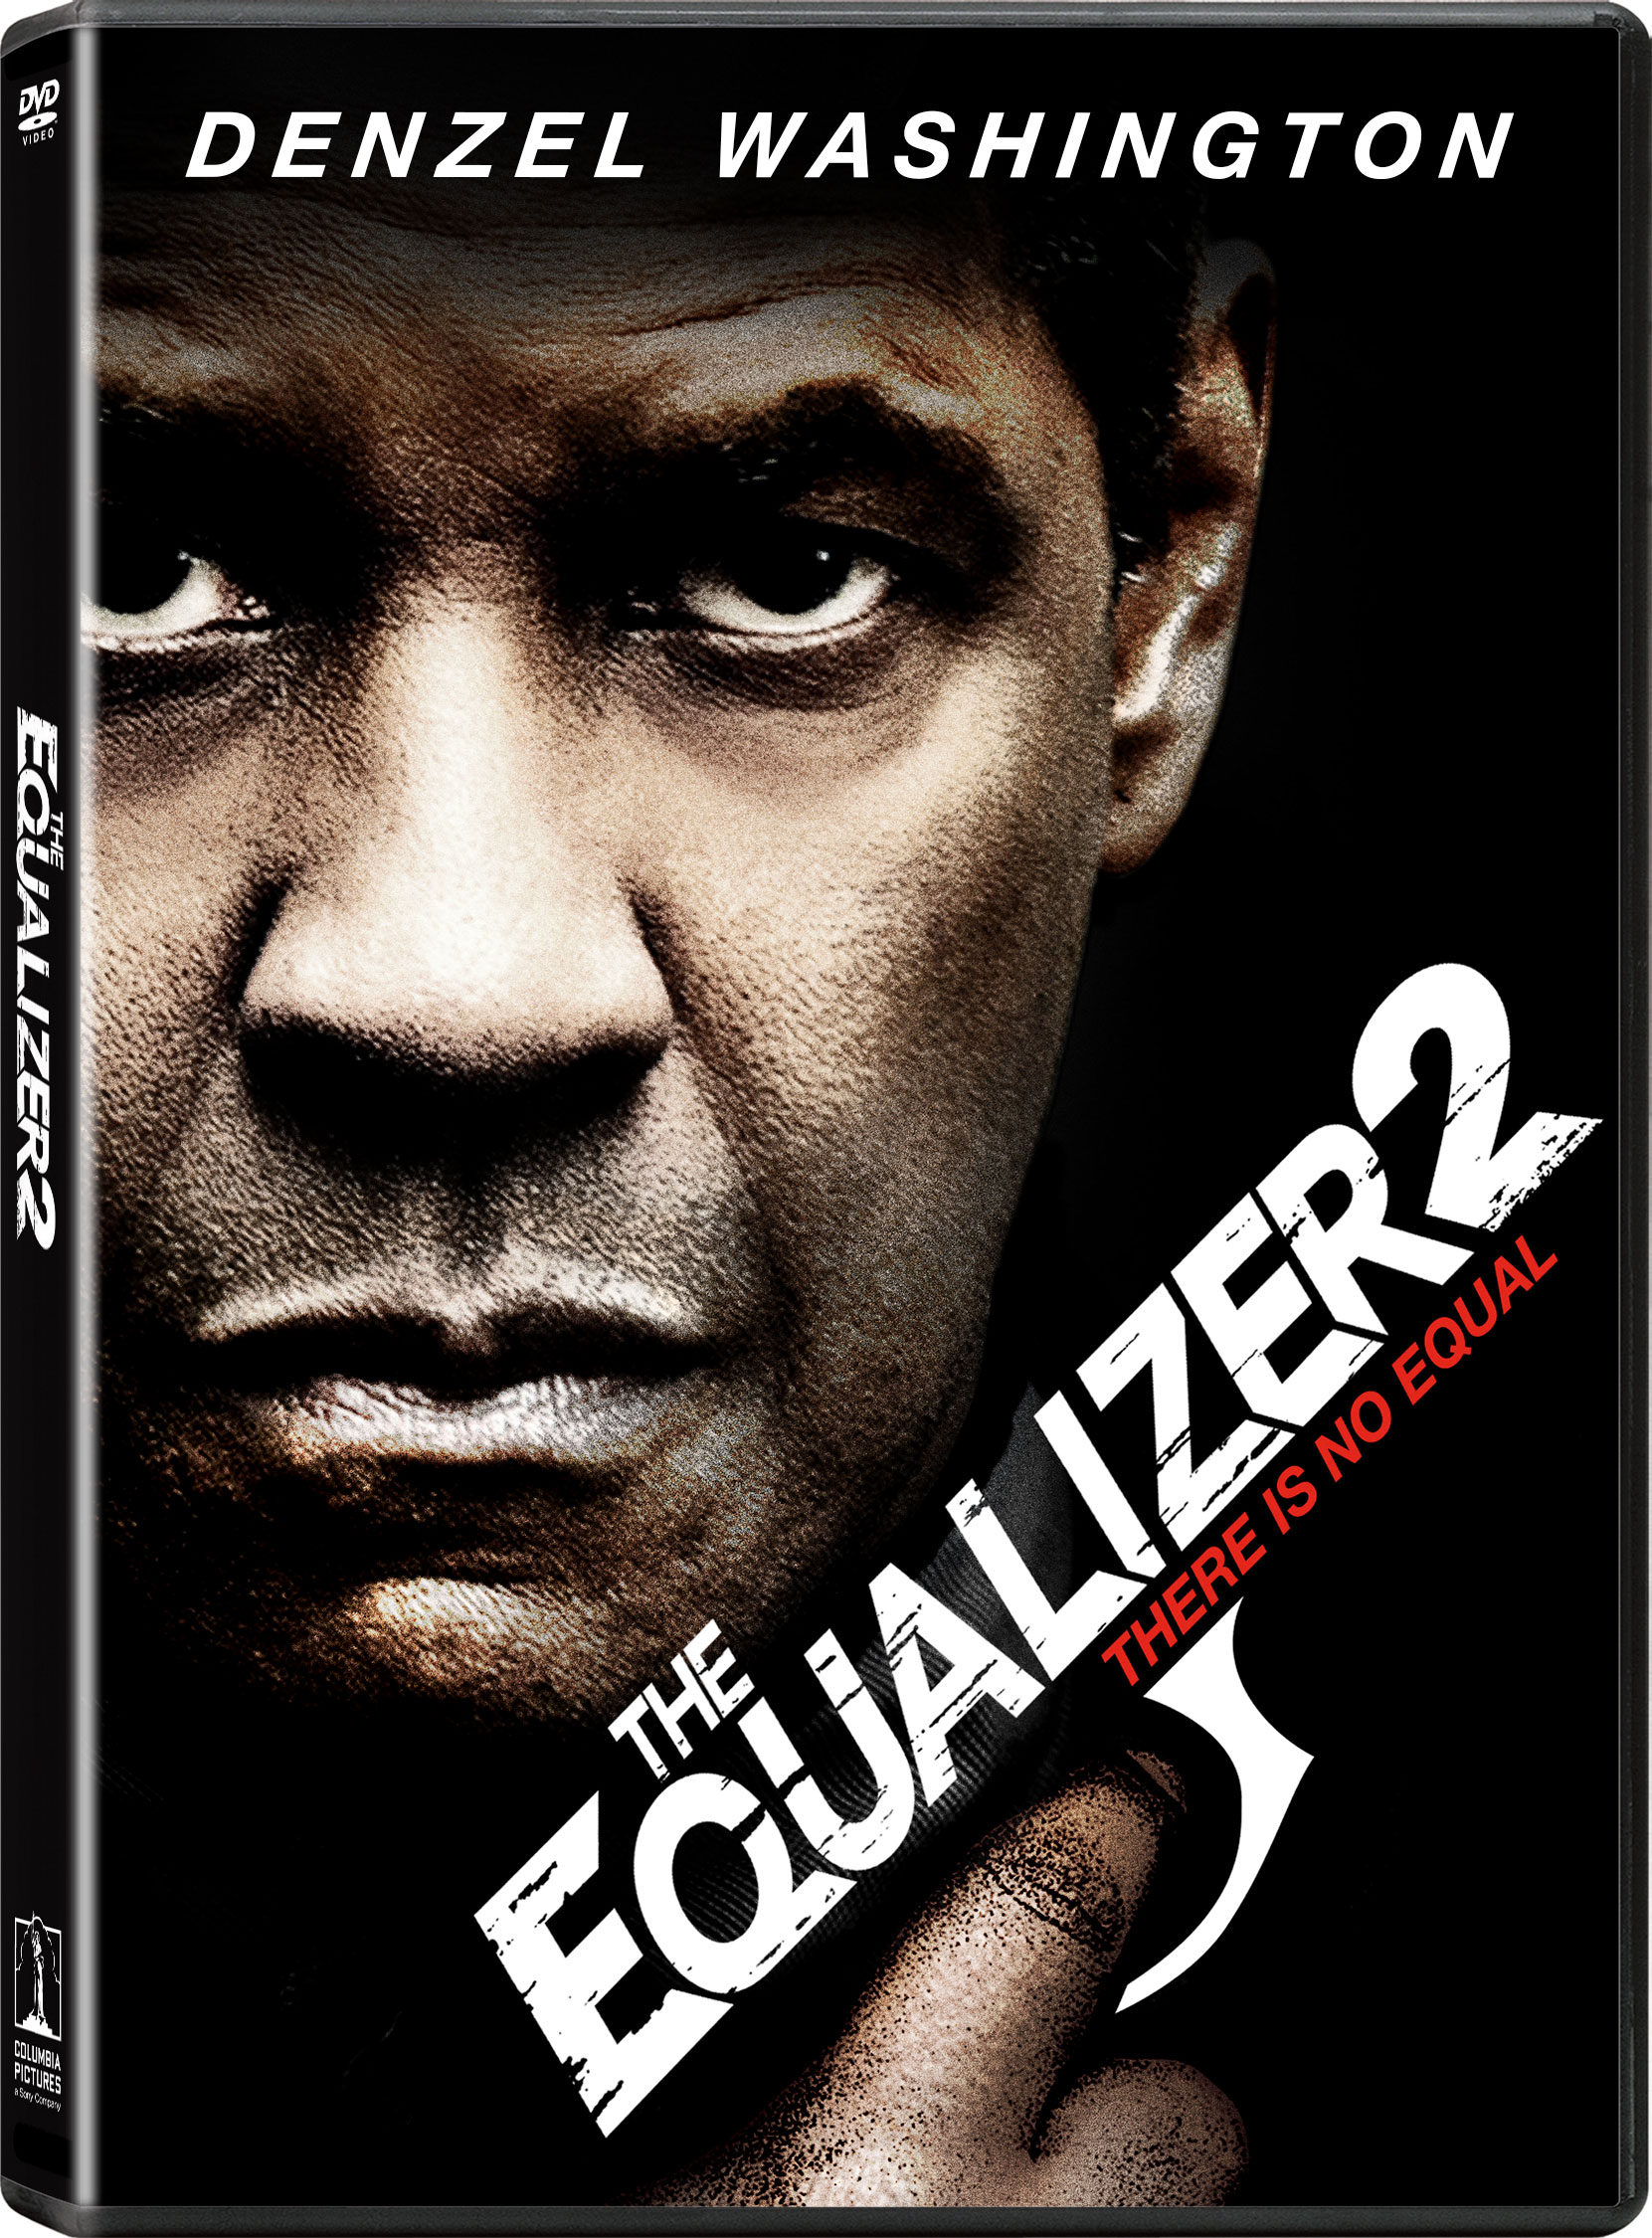 The Equalizer 2 DVD cover (Sony Pictures Home Entertainment)